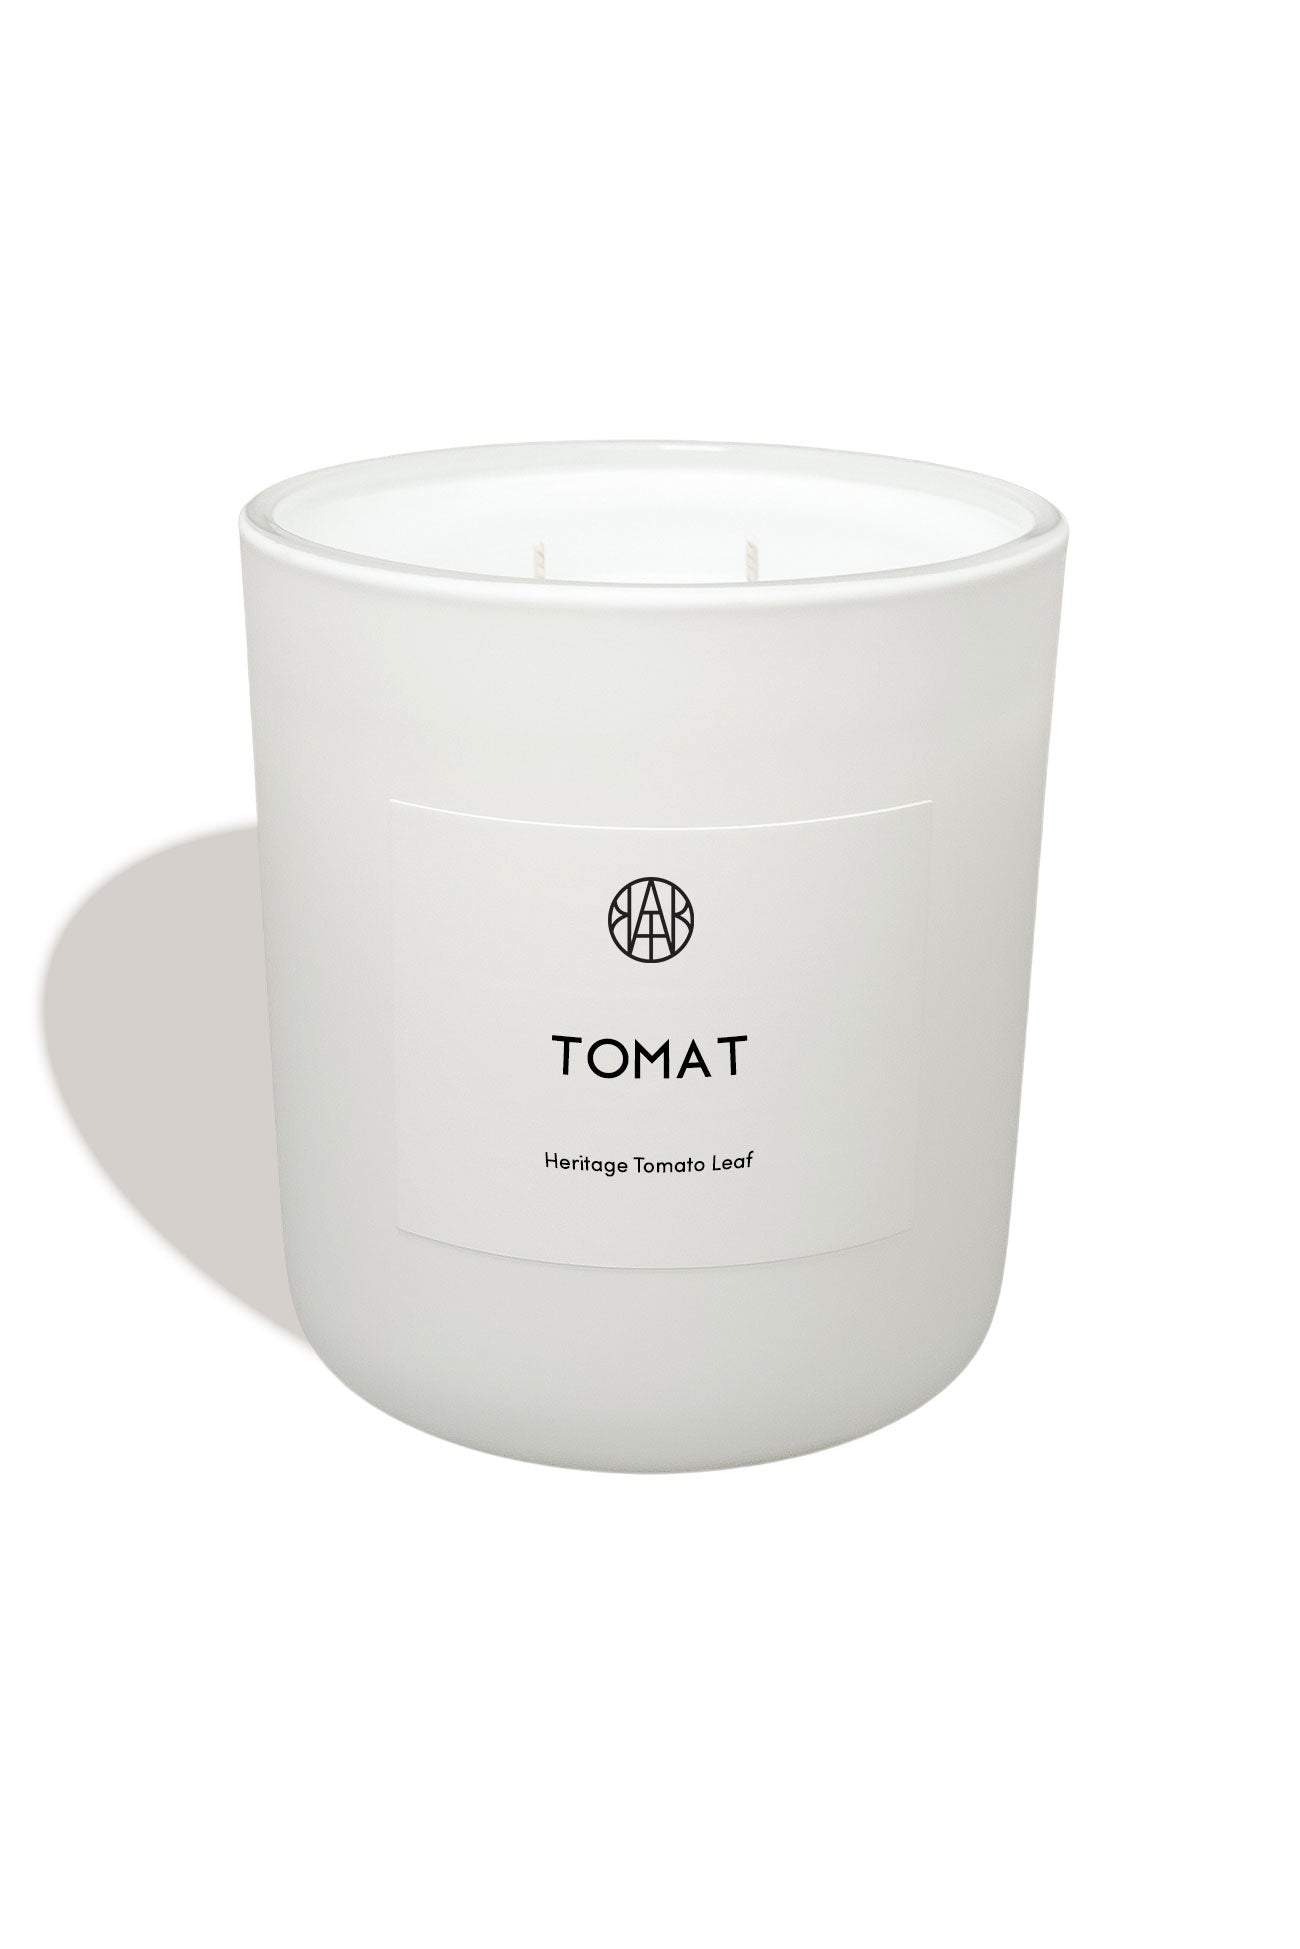 TOMAT - Deluxe Candle - AEMBR - Clean Luxury Candles, Wax Melts & Laundry Care